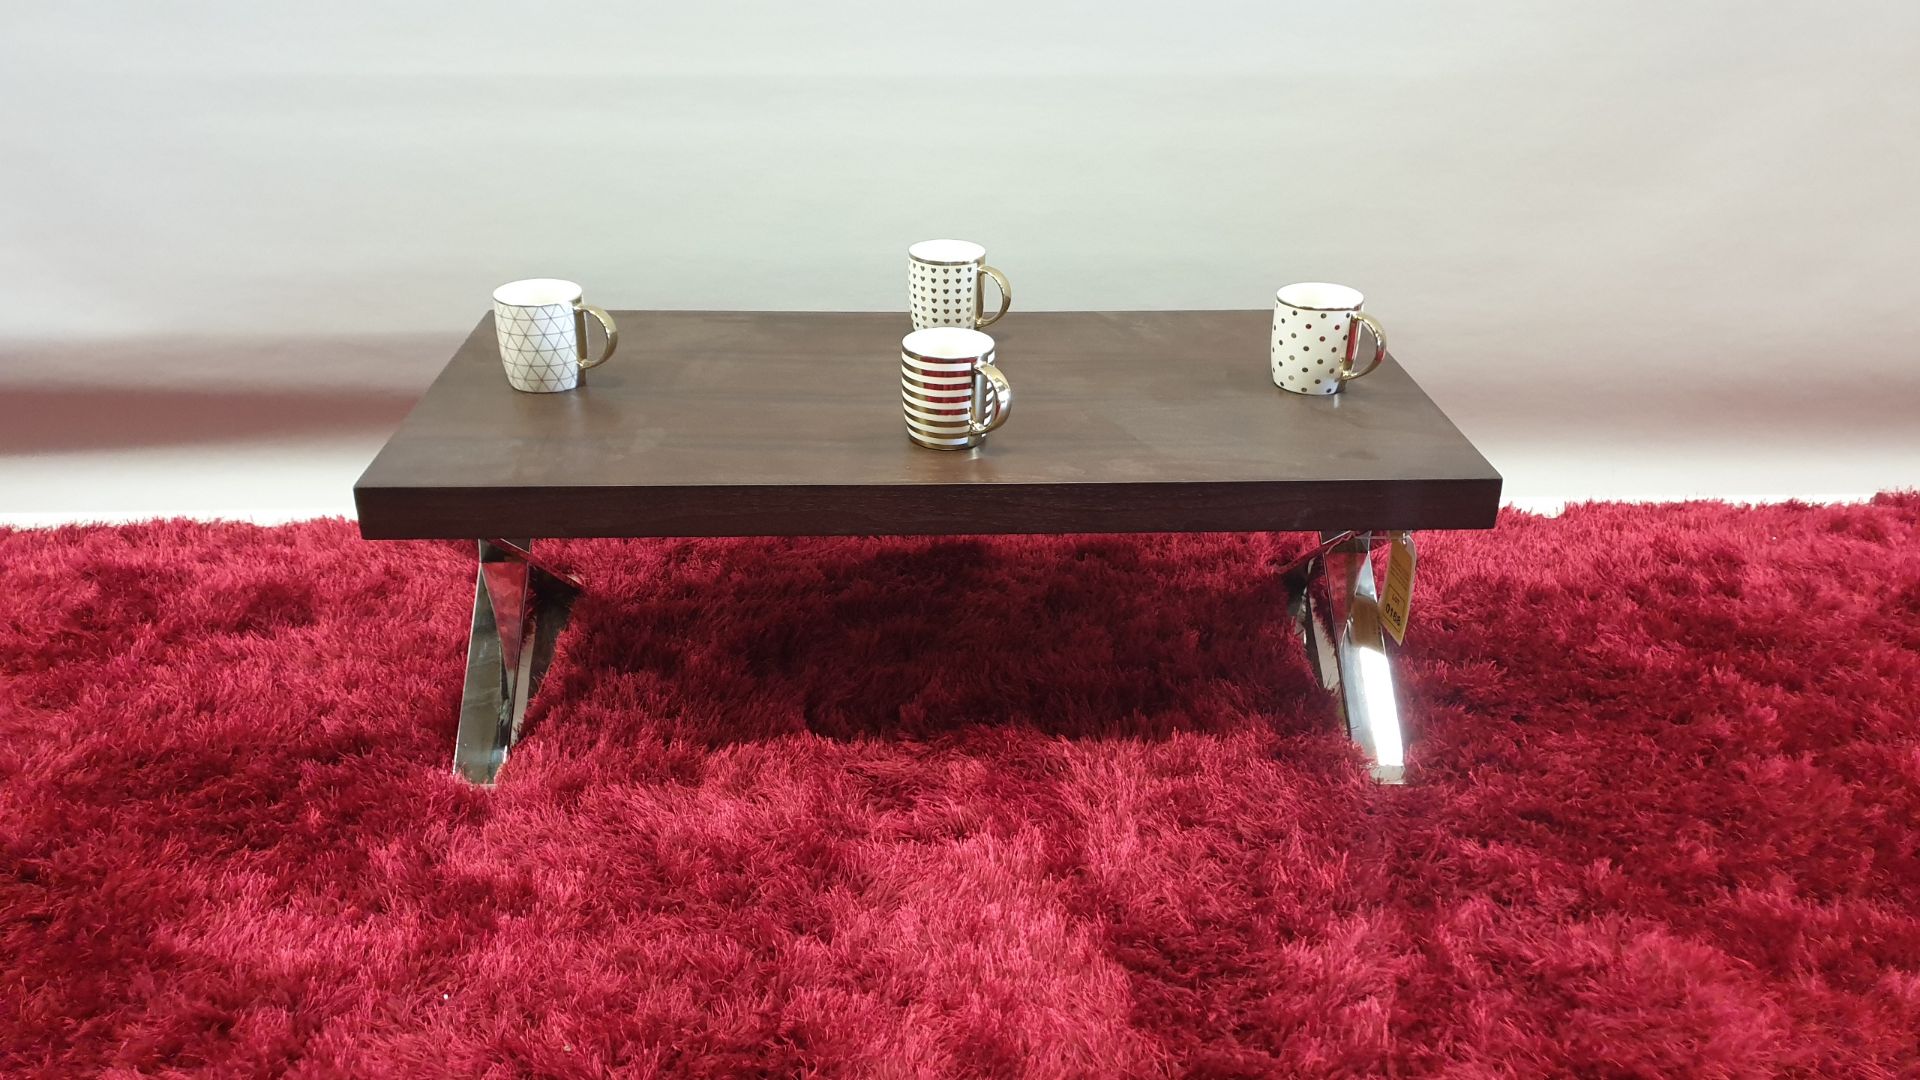 BRAND NEW COFFEE TABLE WITH METAL LEGS SIZE 900 X 490 X 350 MM RRP £425.00